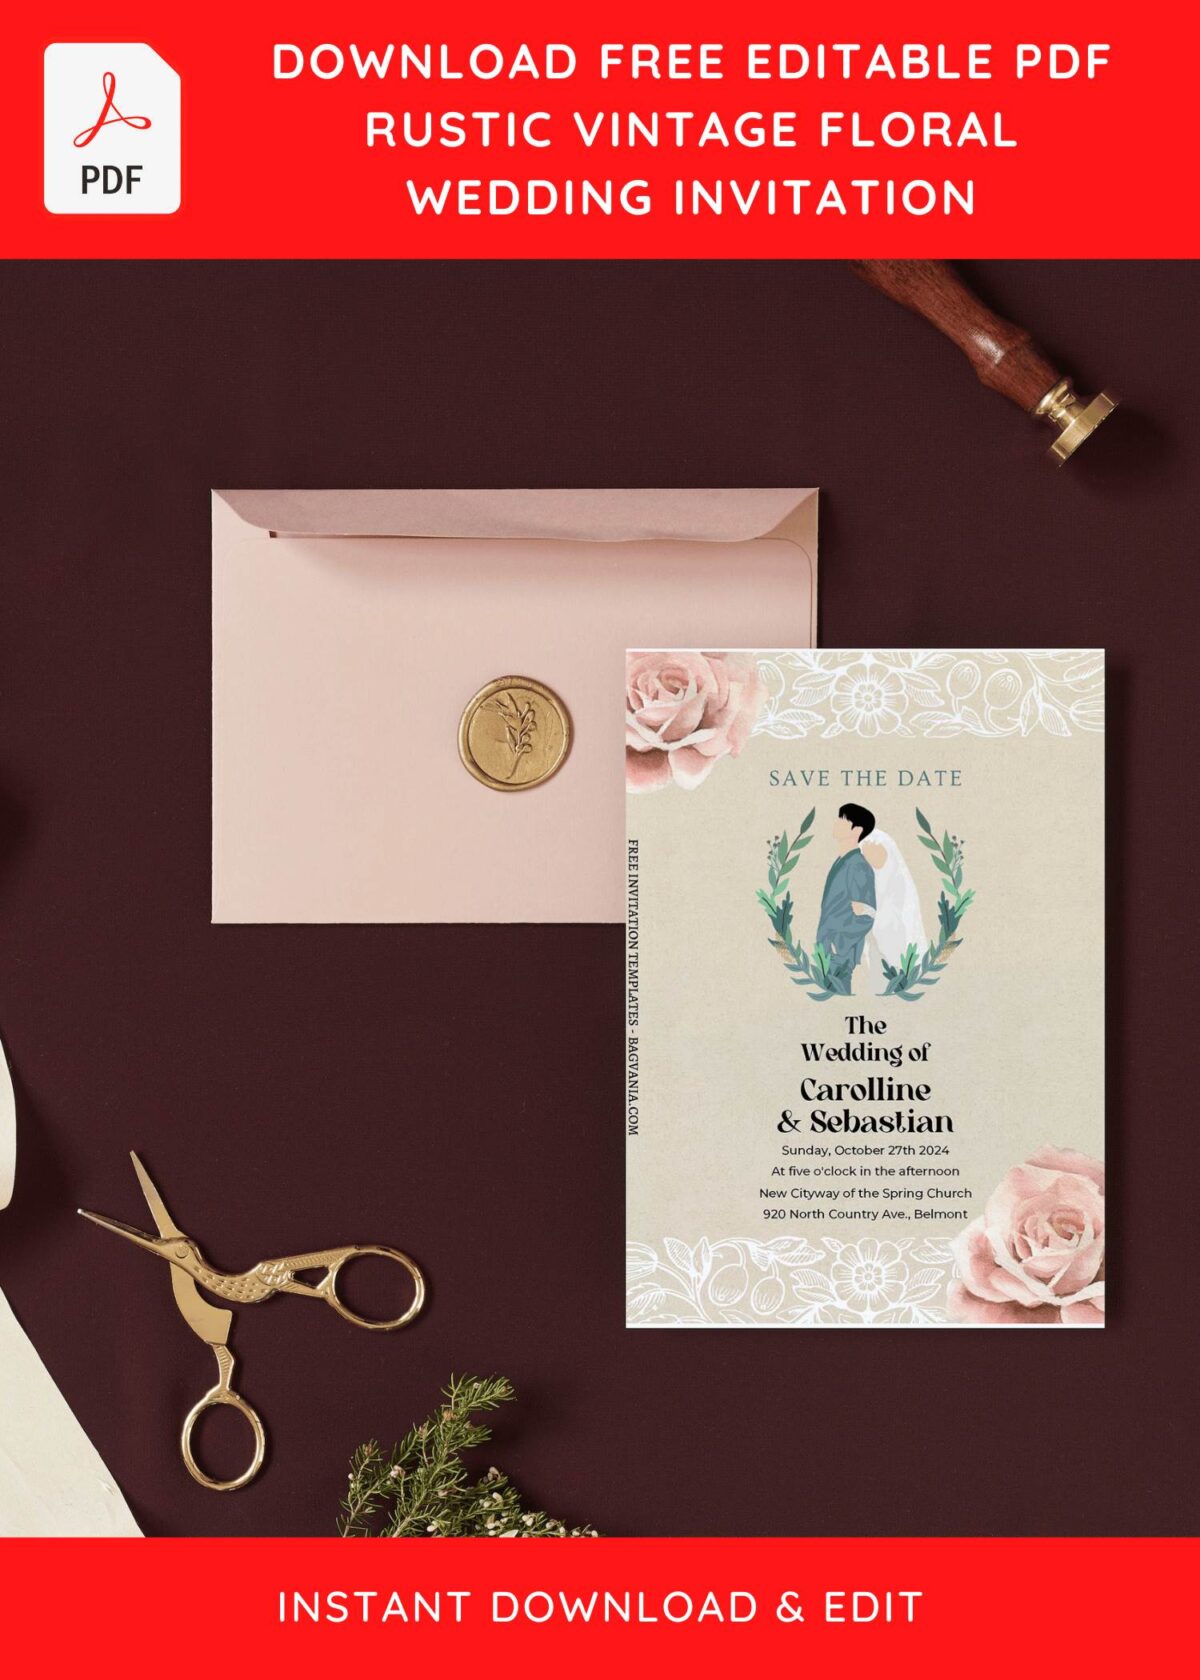 (Free Editable PDF) Lovely Creative Rustic Wedding Invitation Templates with rustic background